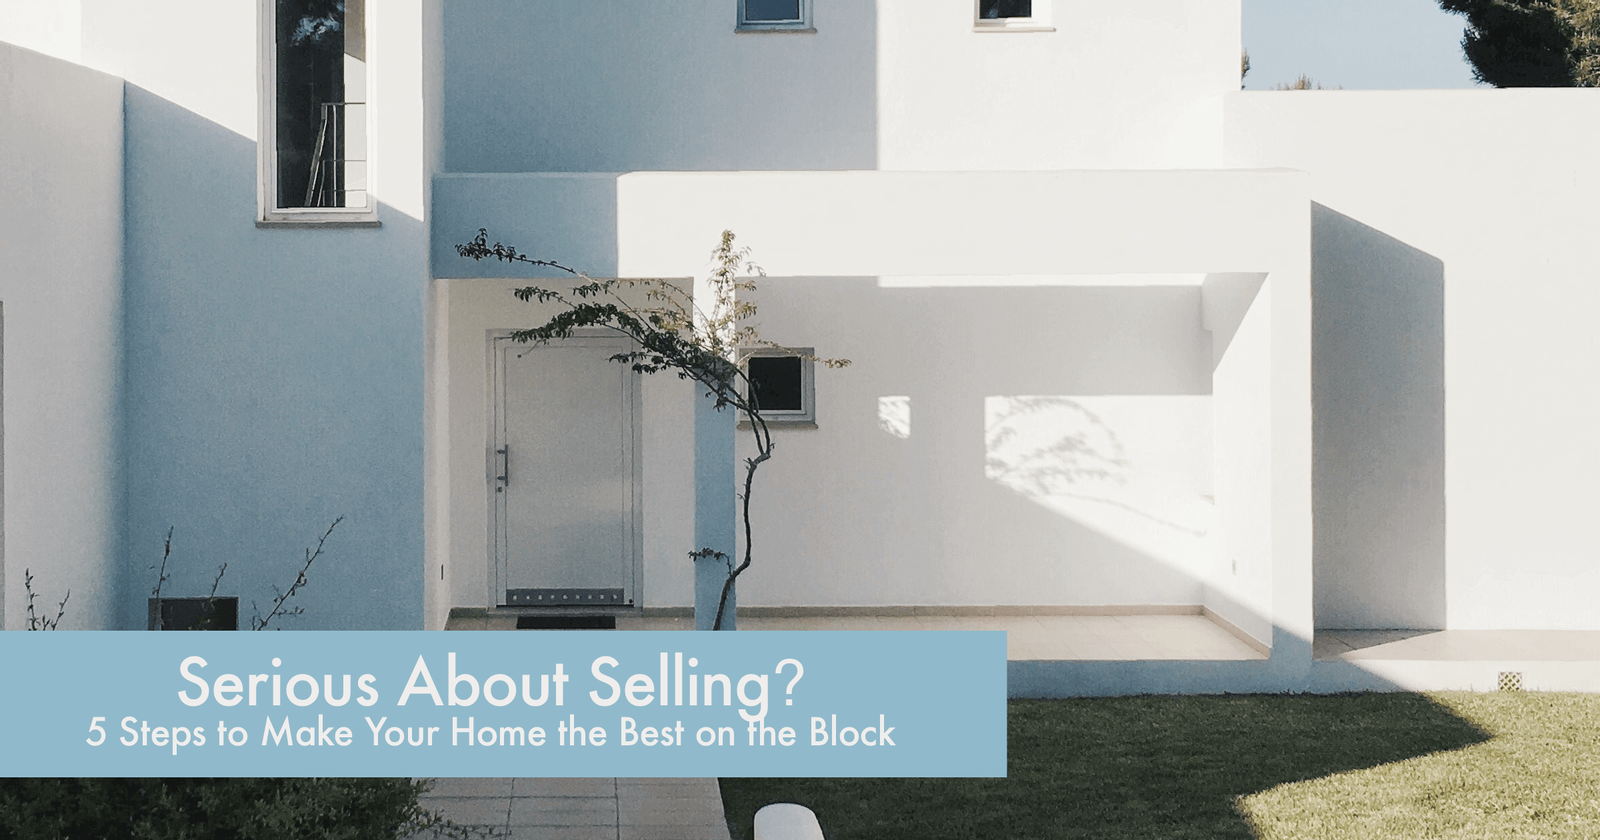 Serious About Selling - 5 Steps to Make Your Home the Best on the Block